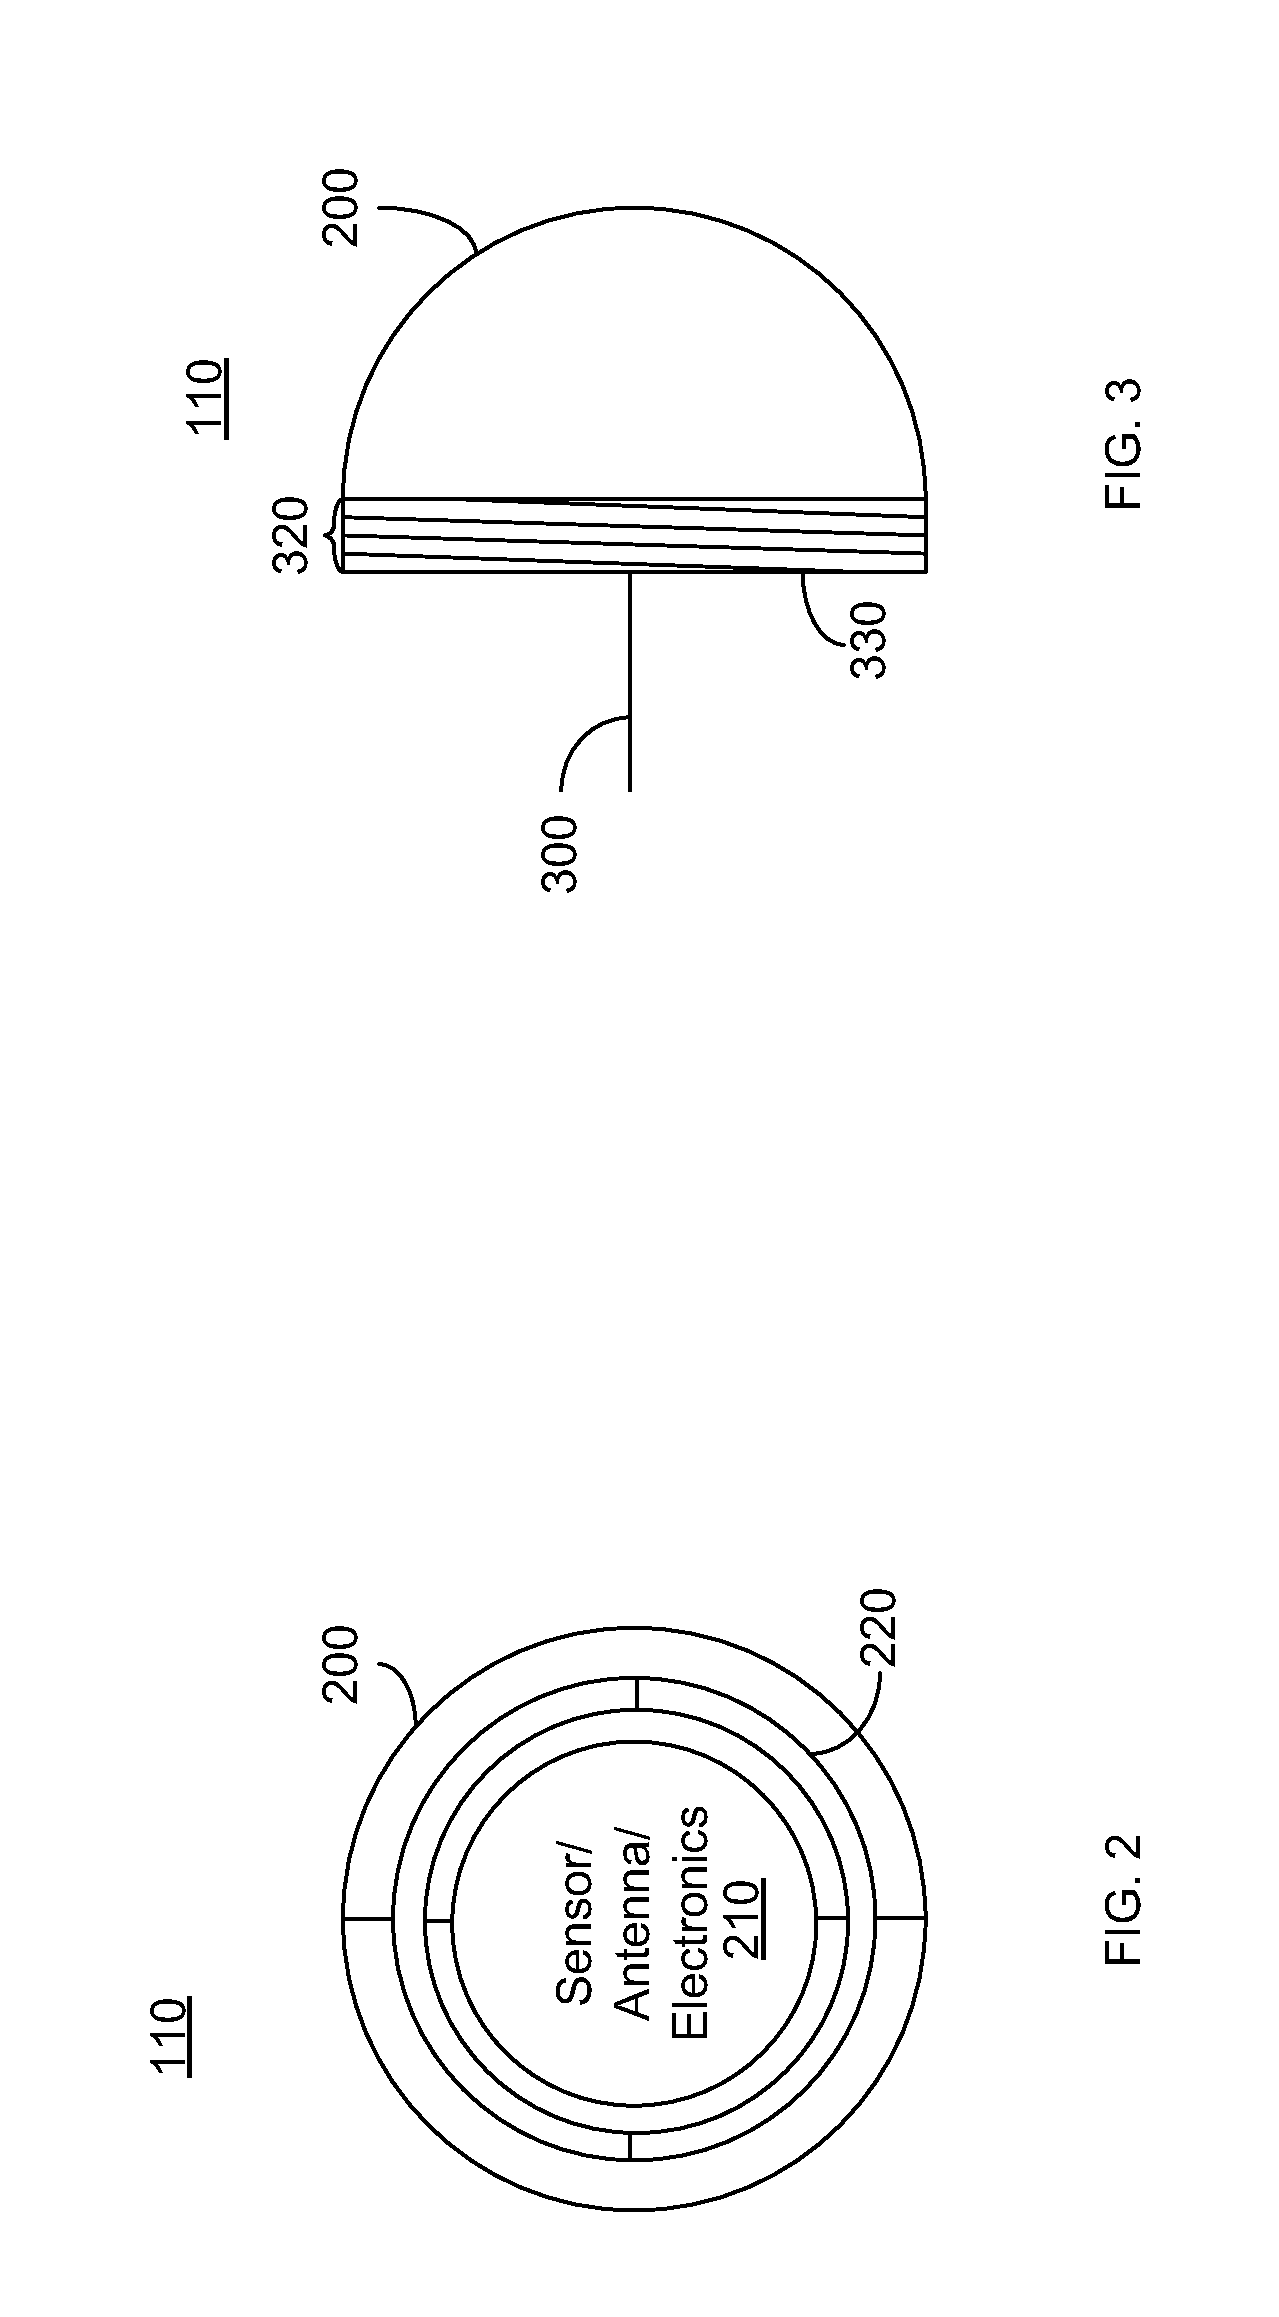 Horizon scanning system for a rotary wing aircraft including sensors housed within a tubercle on a rotor blade